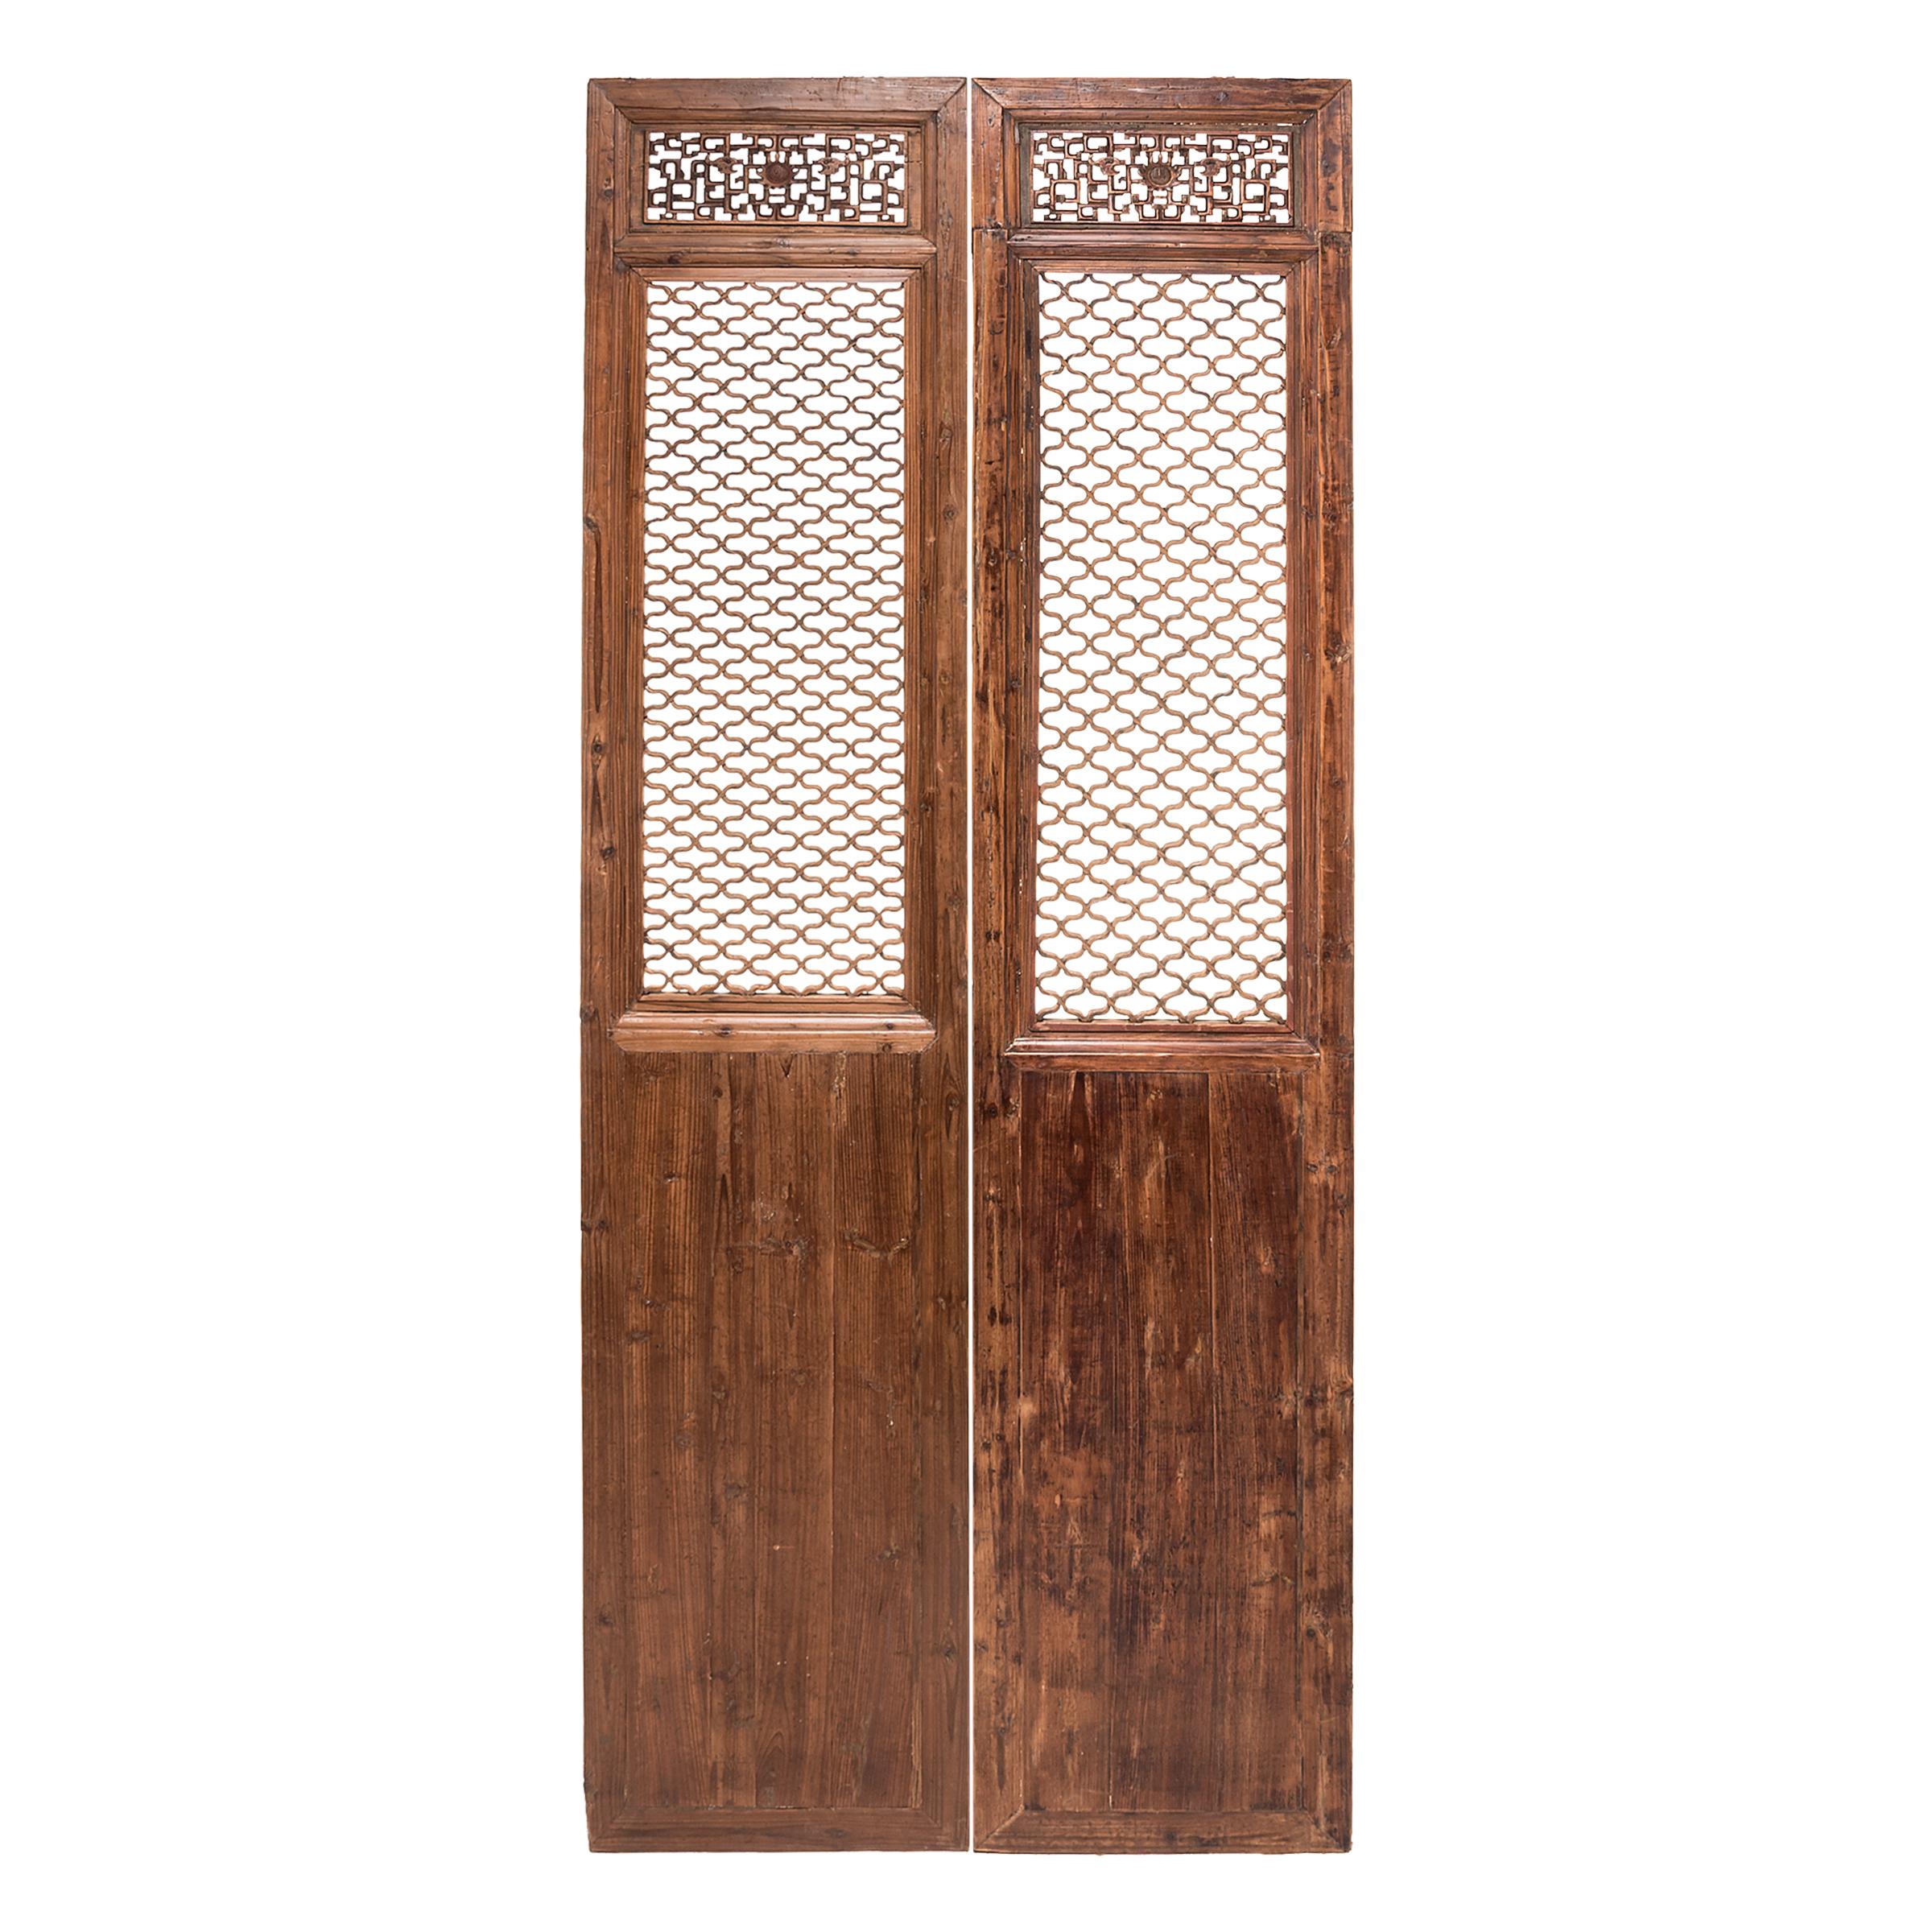 The sweeping elegance of these four 19th century courtyard doors, with their intricate lattice panels, hides the mathematical brilliance required to create them. The wax-finished, knotty panels evoke life in a traditional courtyard home, where the